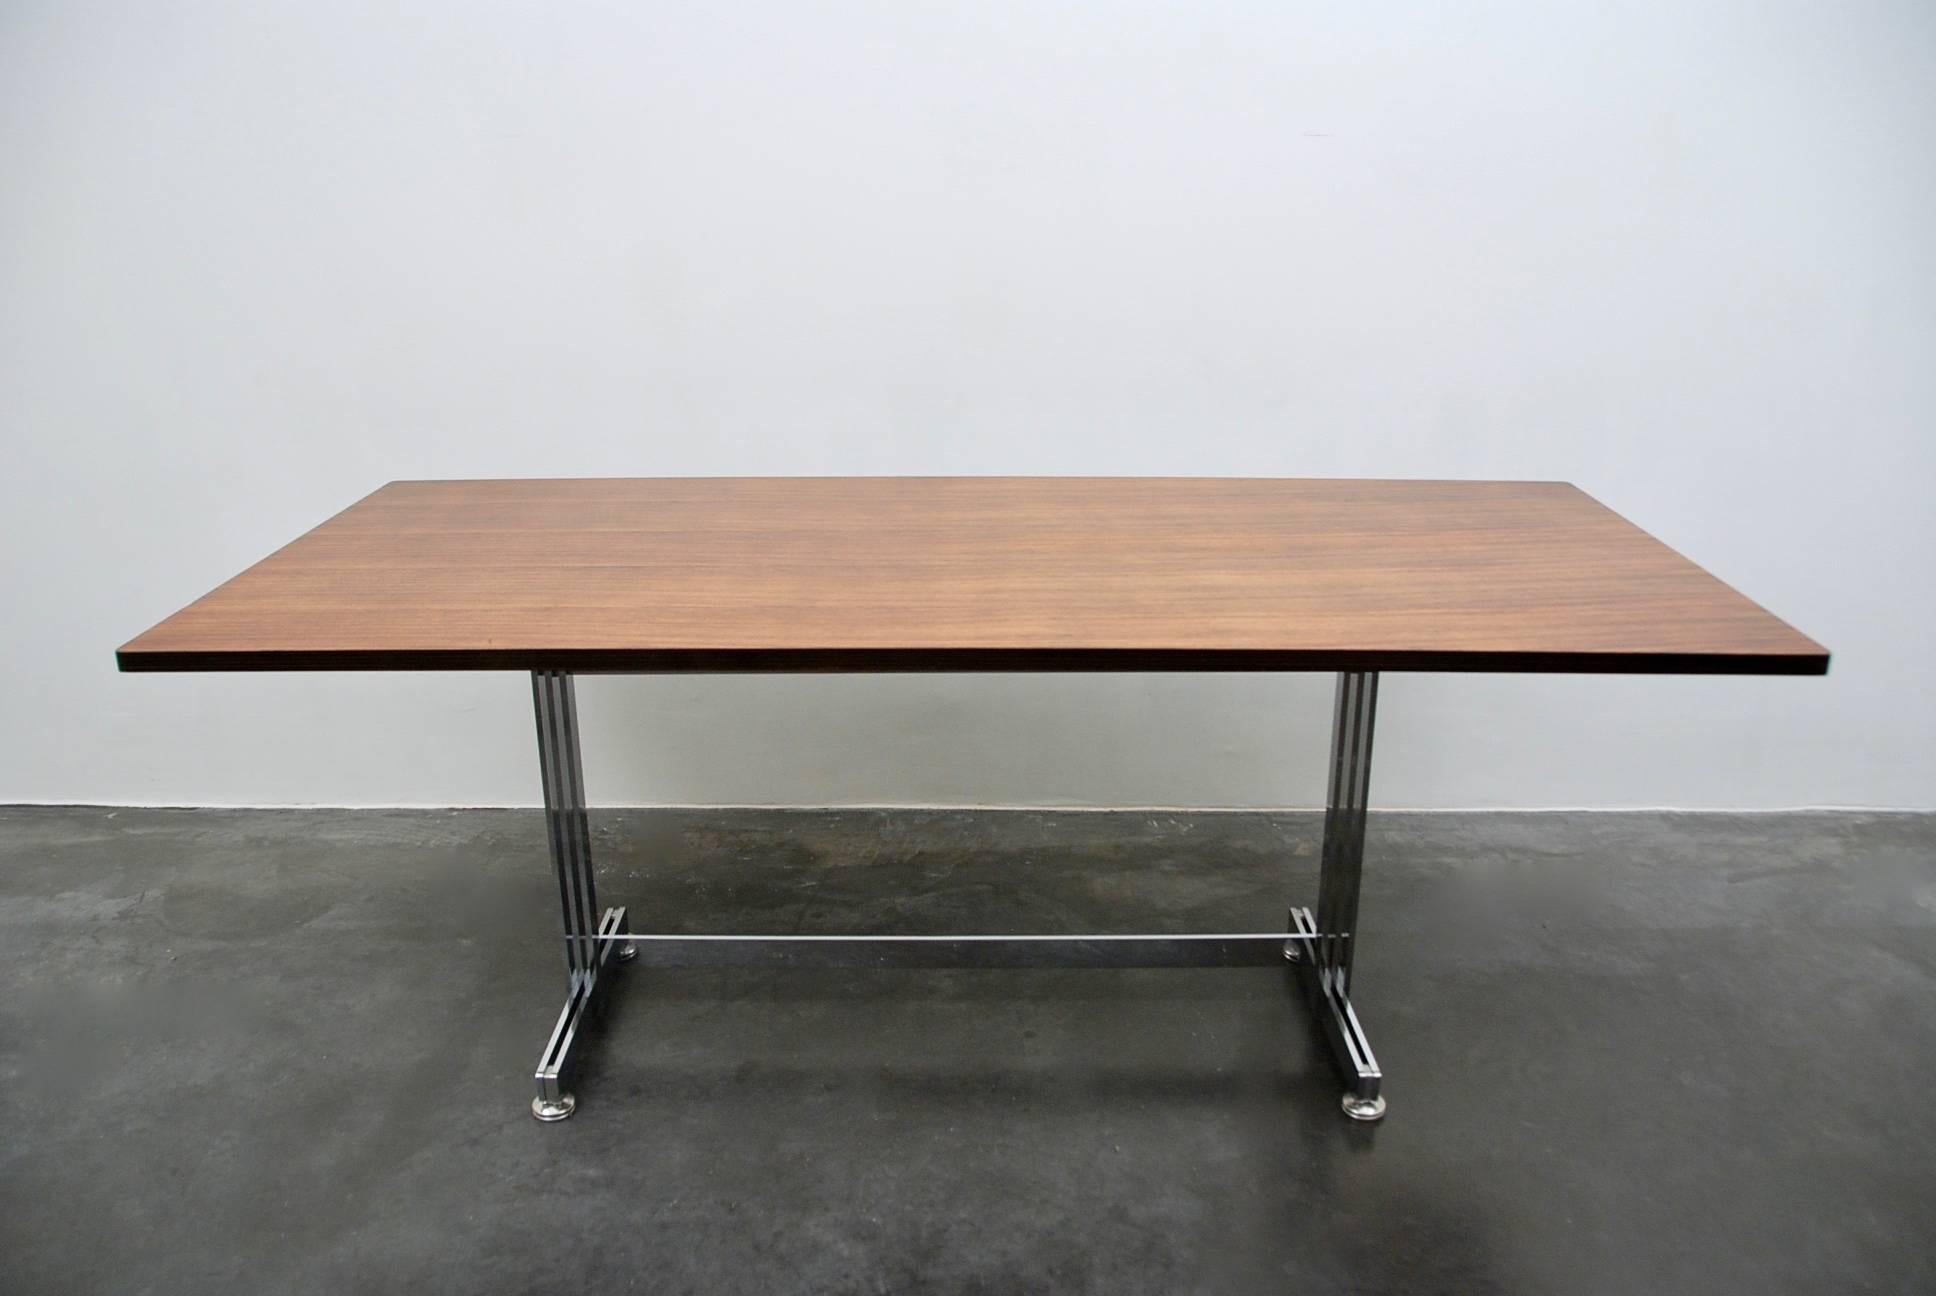 Table by Jules Wabbes, Belgium from the 1960s.
This desk, produced by Mobilier Universel.
Top in veneer Rosewood with solid chrome frame.